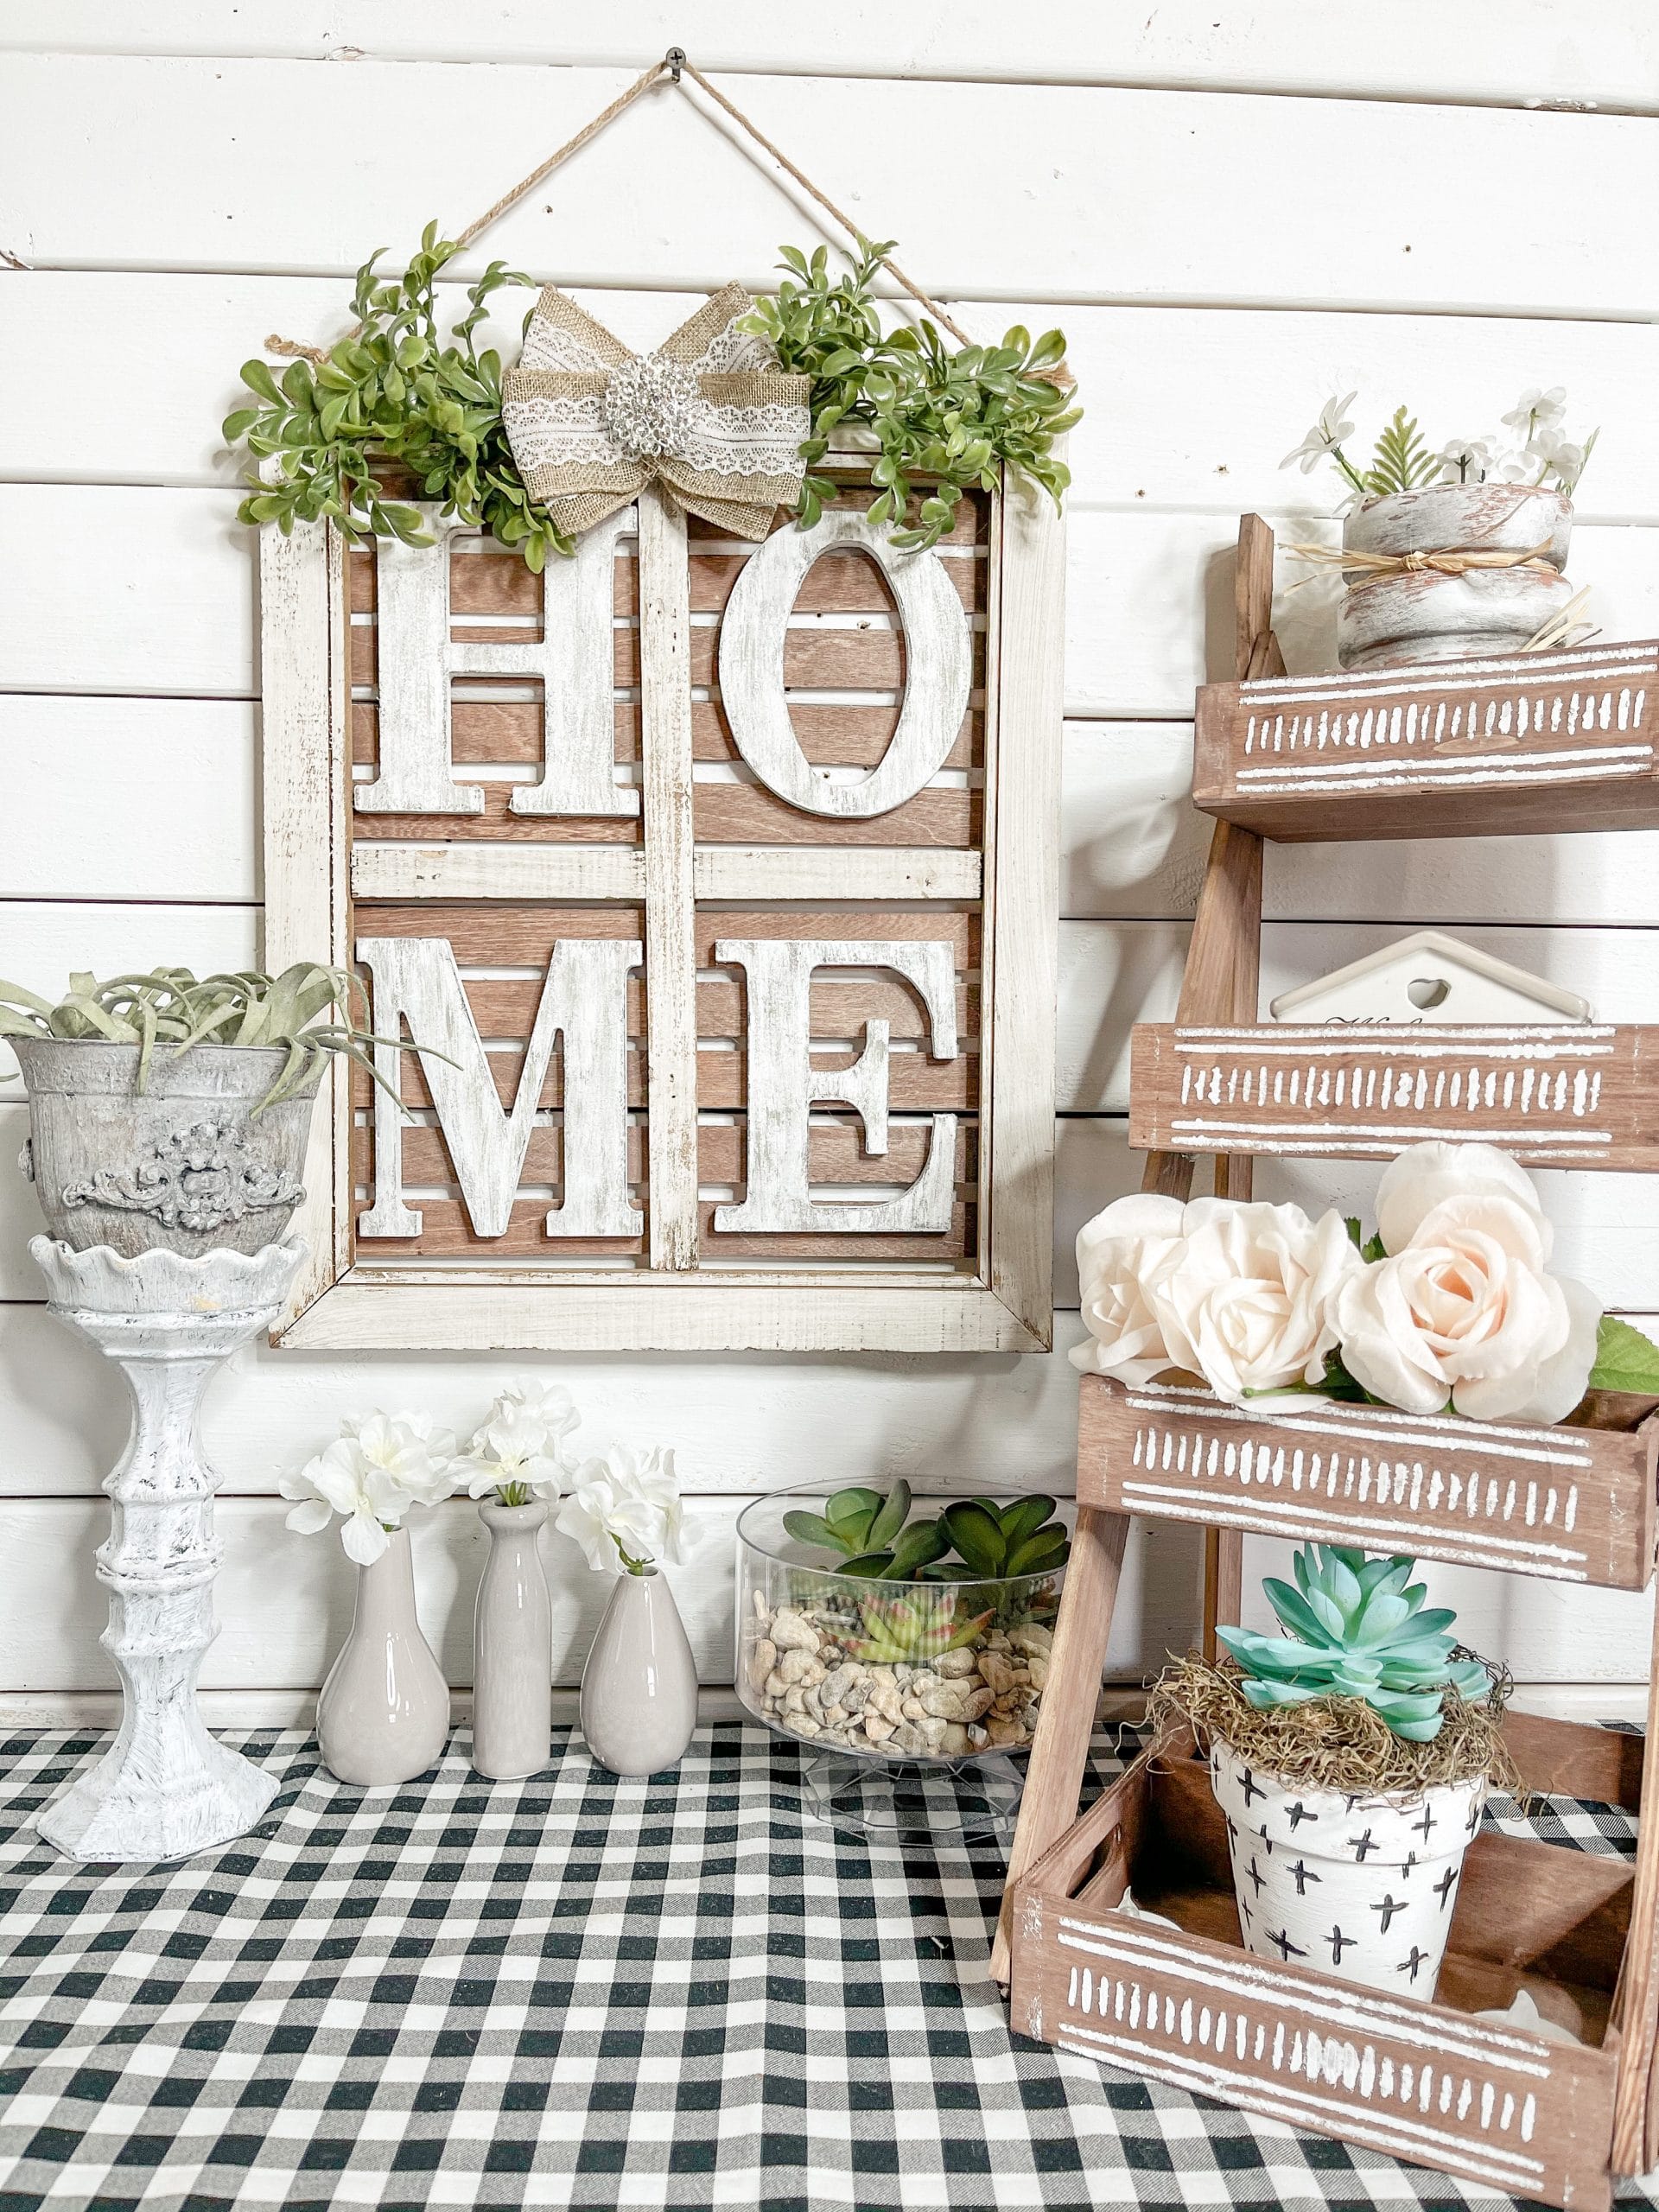 24 Farmhouse Decor DIY Ideas - The Makers Map with Amber Strong